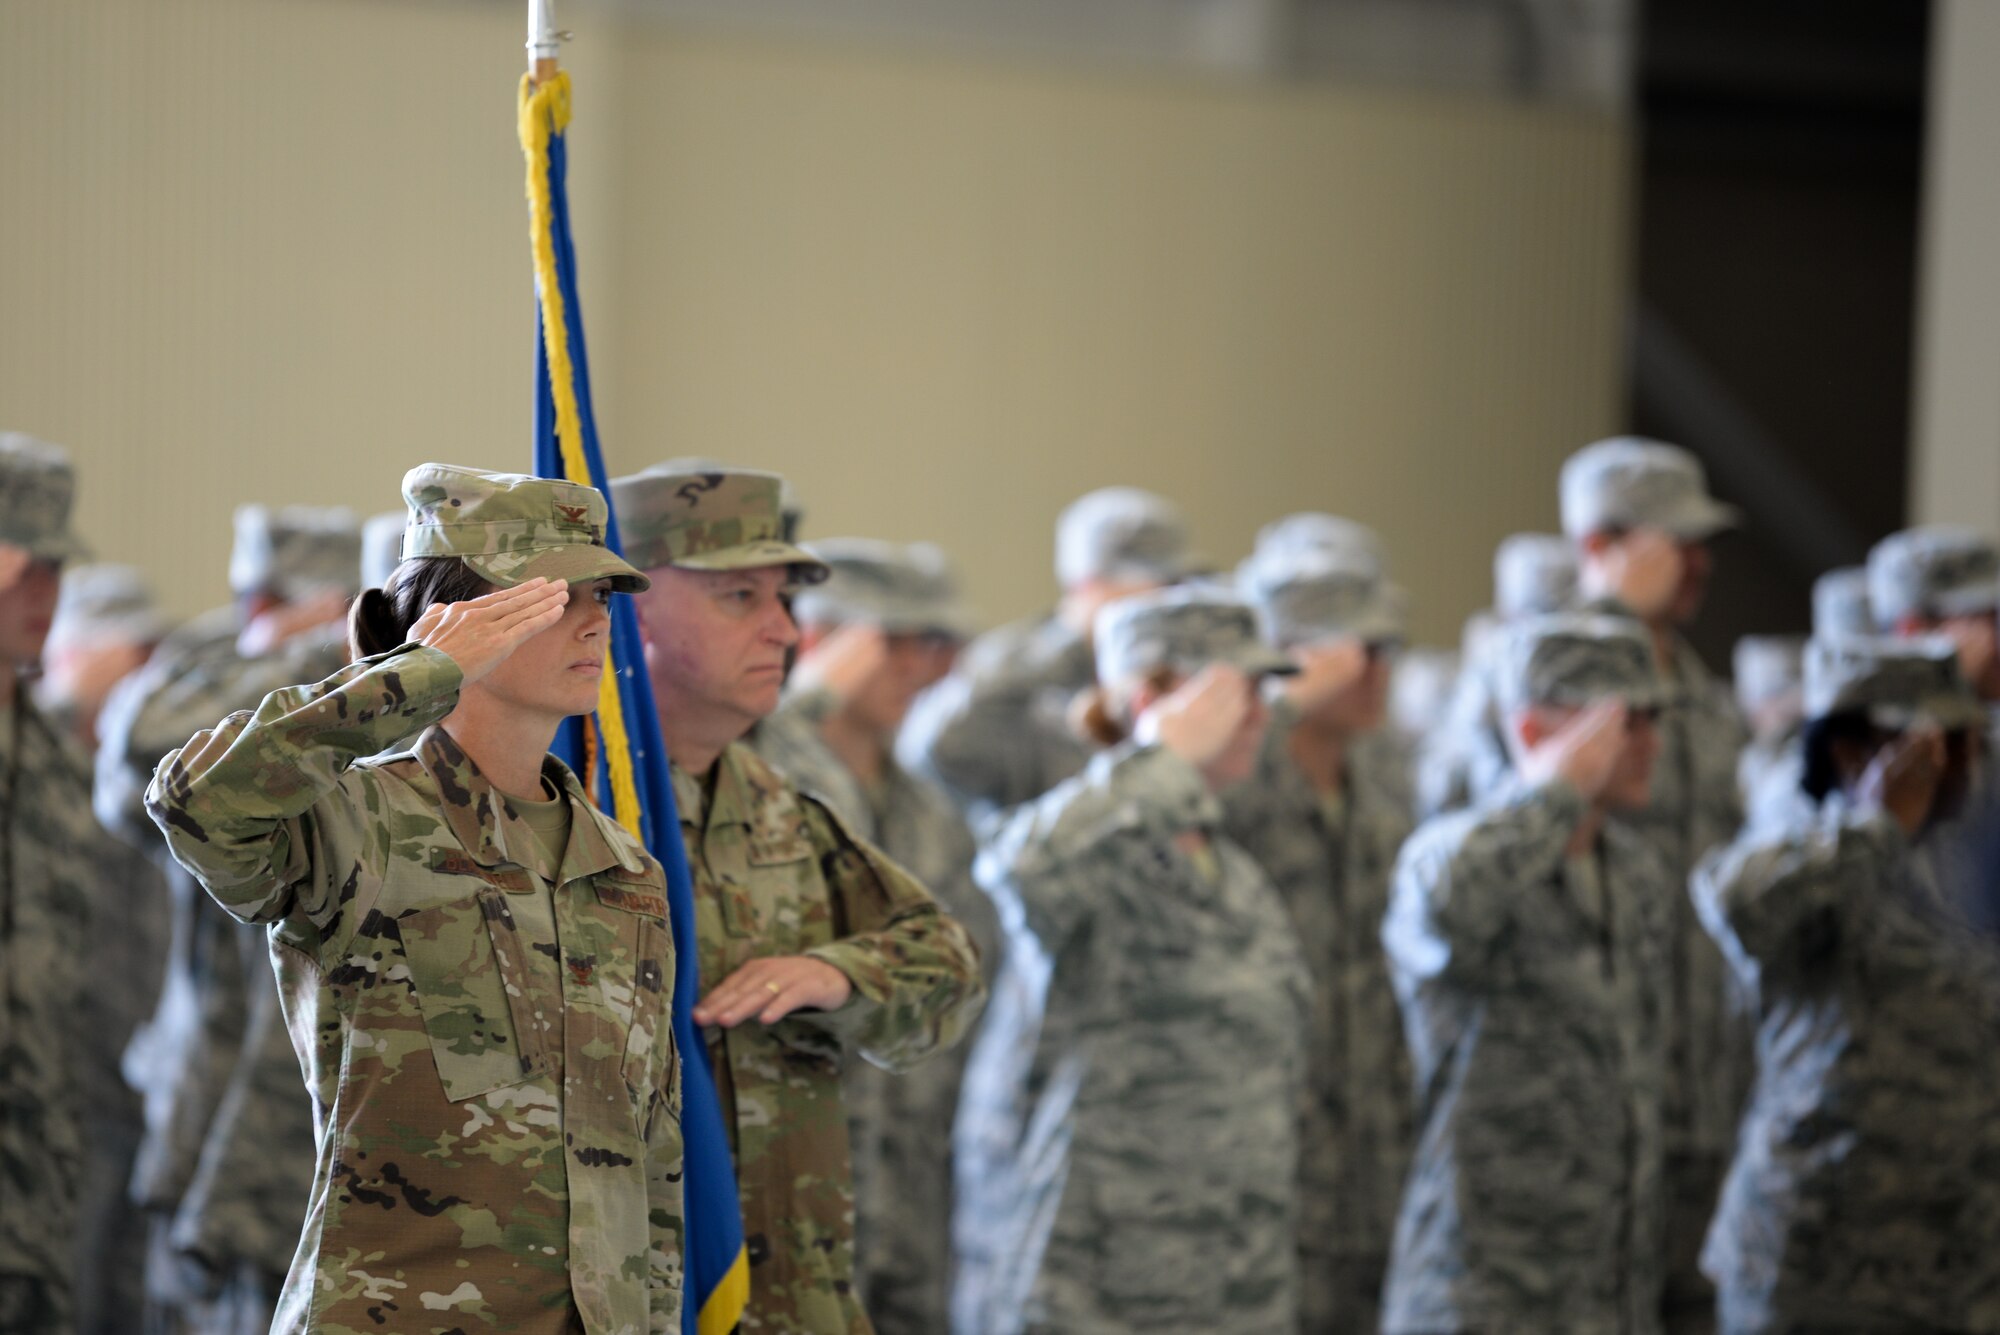 U.S. Air Force Col. Heather Blackwell, 81st Training Wing commander, salutes during the Second Air Force change of command ceremony on Keesler Air Force Base, Mississippi, Aug. 29, 2019. The
ceremony is a symbol of command being exchanged from one commander to the next. Maj. Gen. Andrea Tullos assumed command of the Second Air Force from Maj. Gen. Timothy Leahy. (U.S. Air Force photo by Airman 1st Class Spencer Tobler)